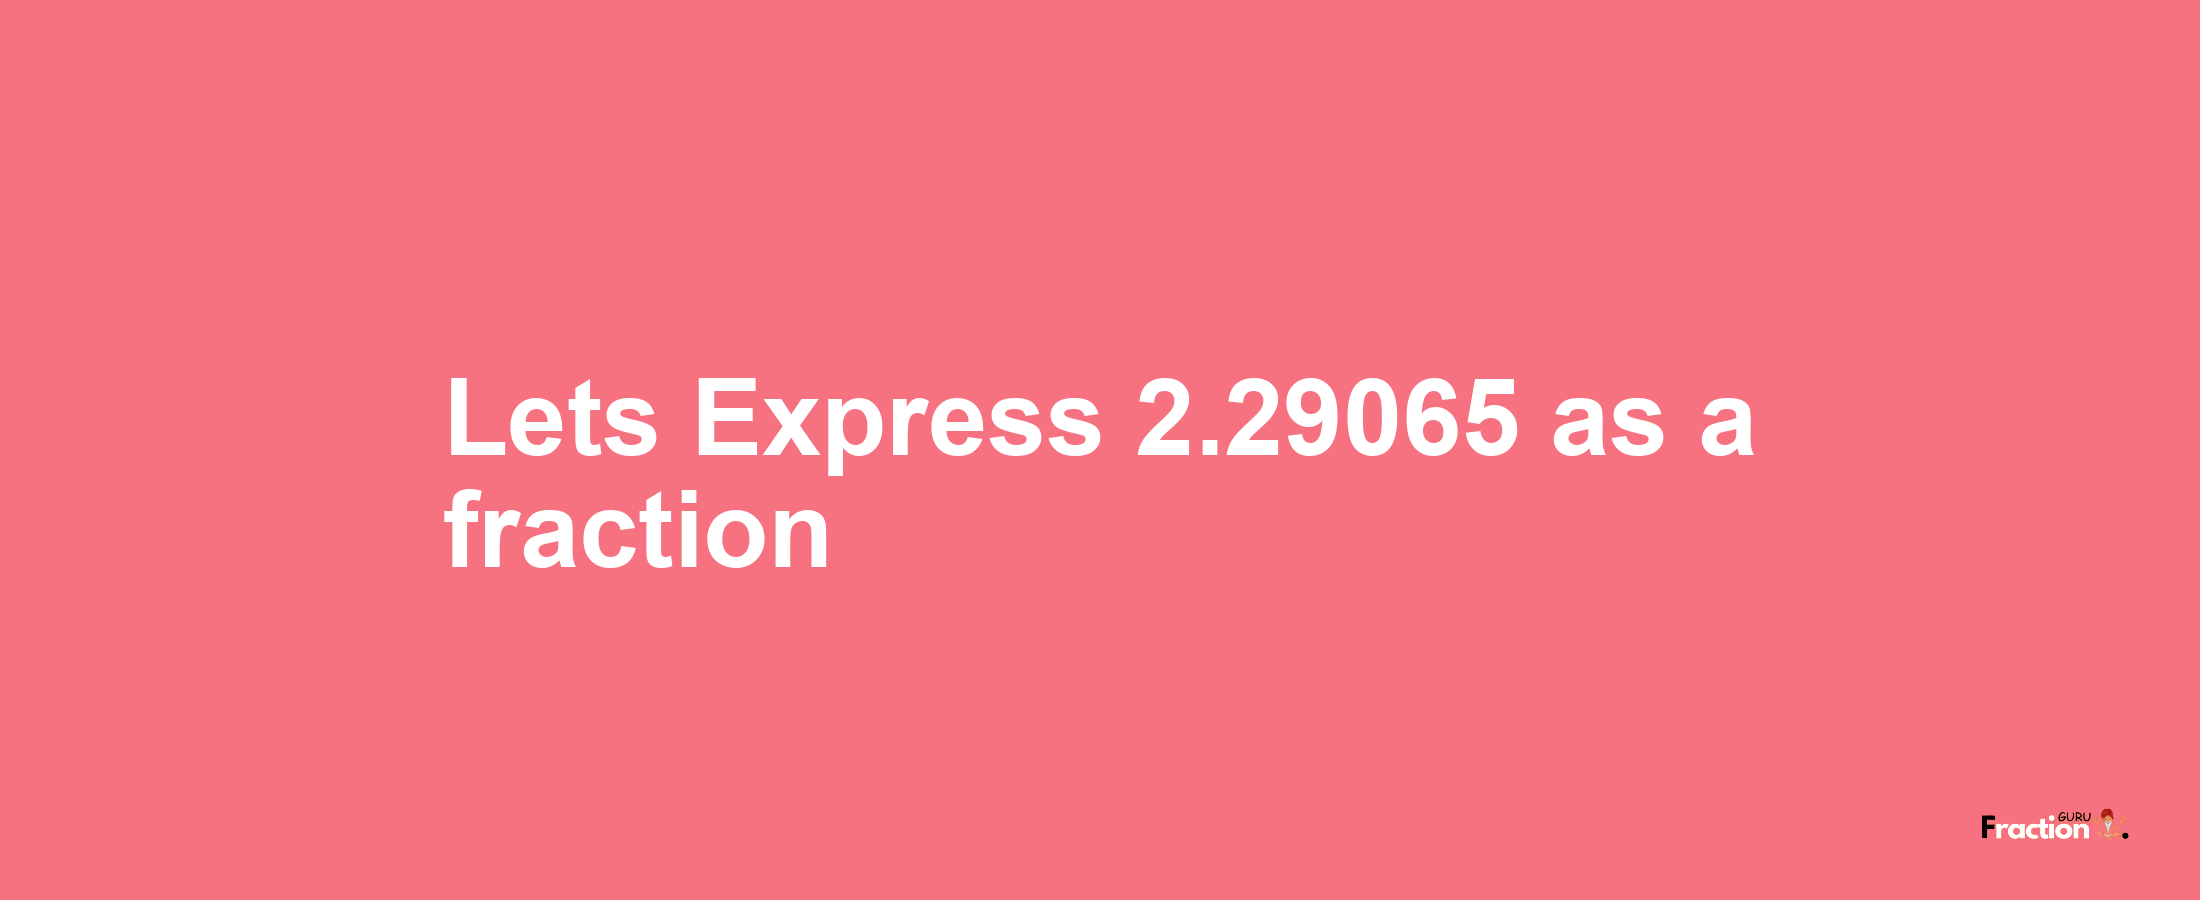 Lets Express 2.29065 as afraction